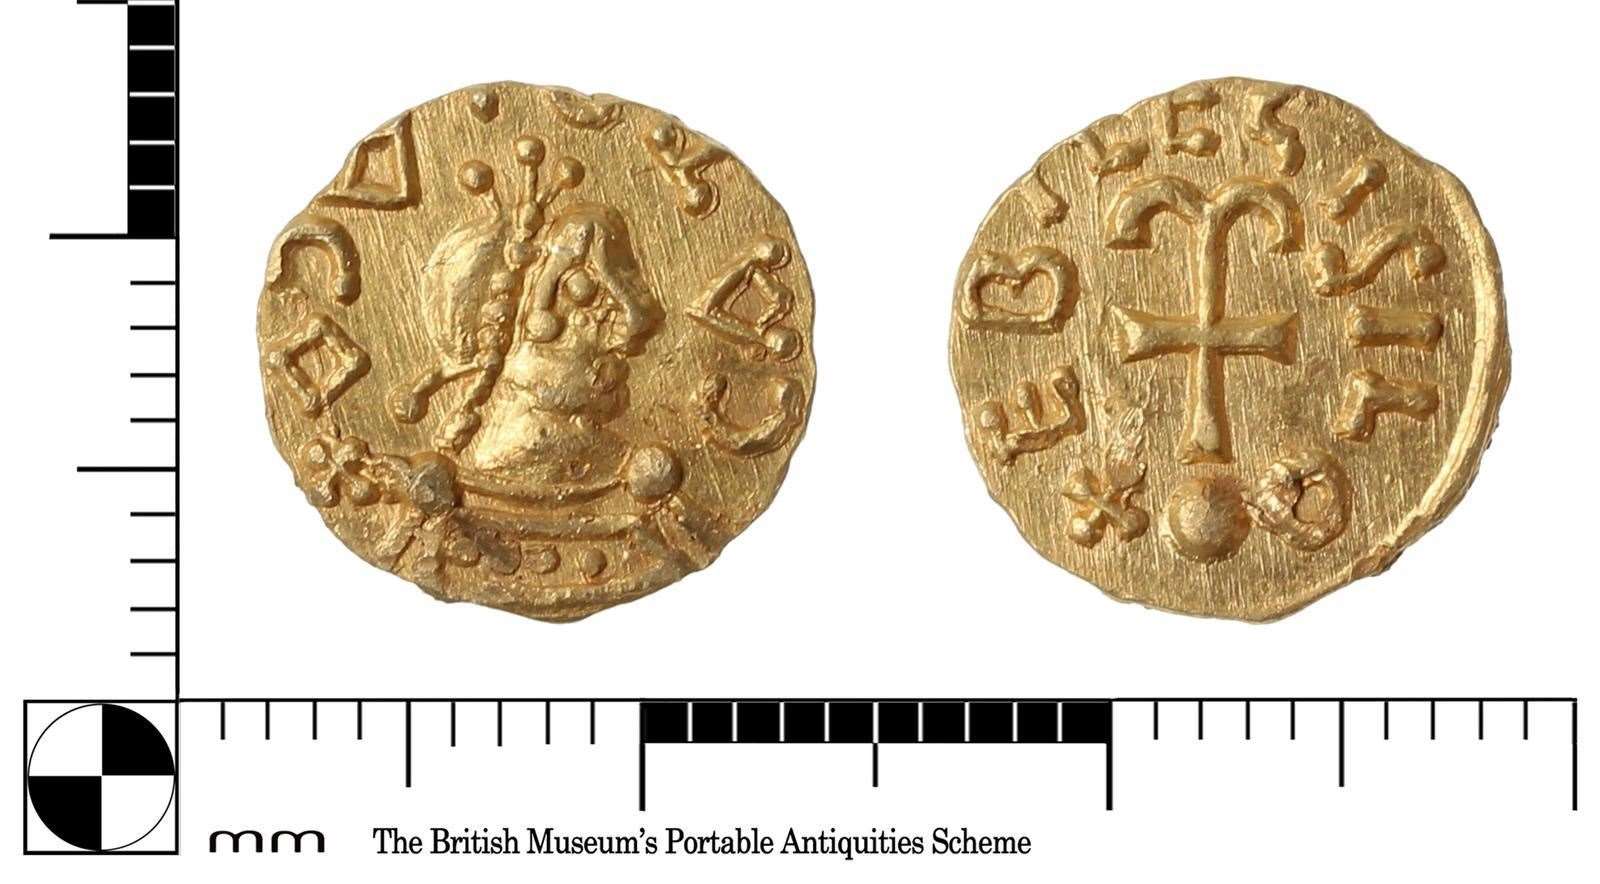 One of two Merovingian gold tremissis found by David Callow